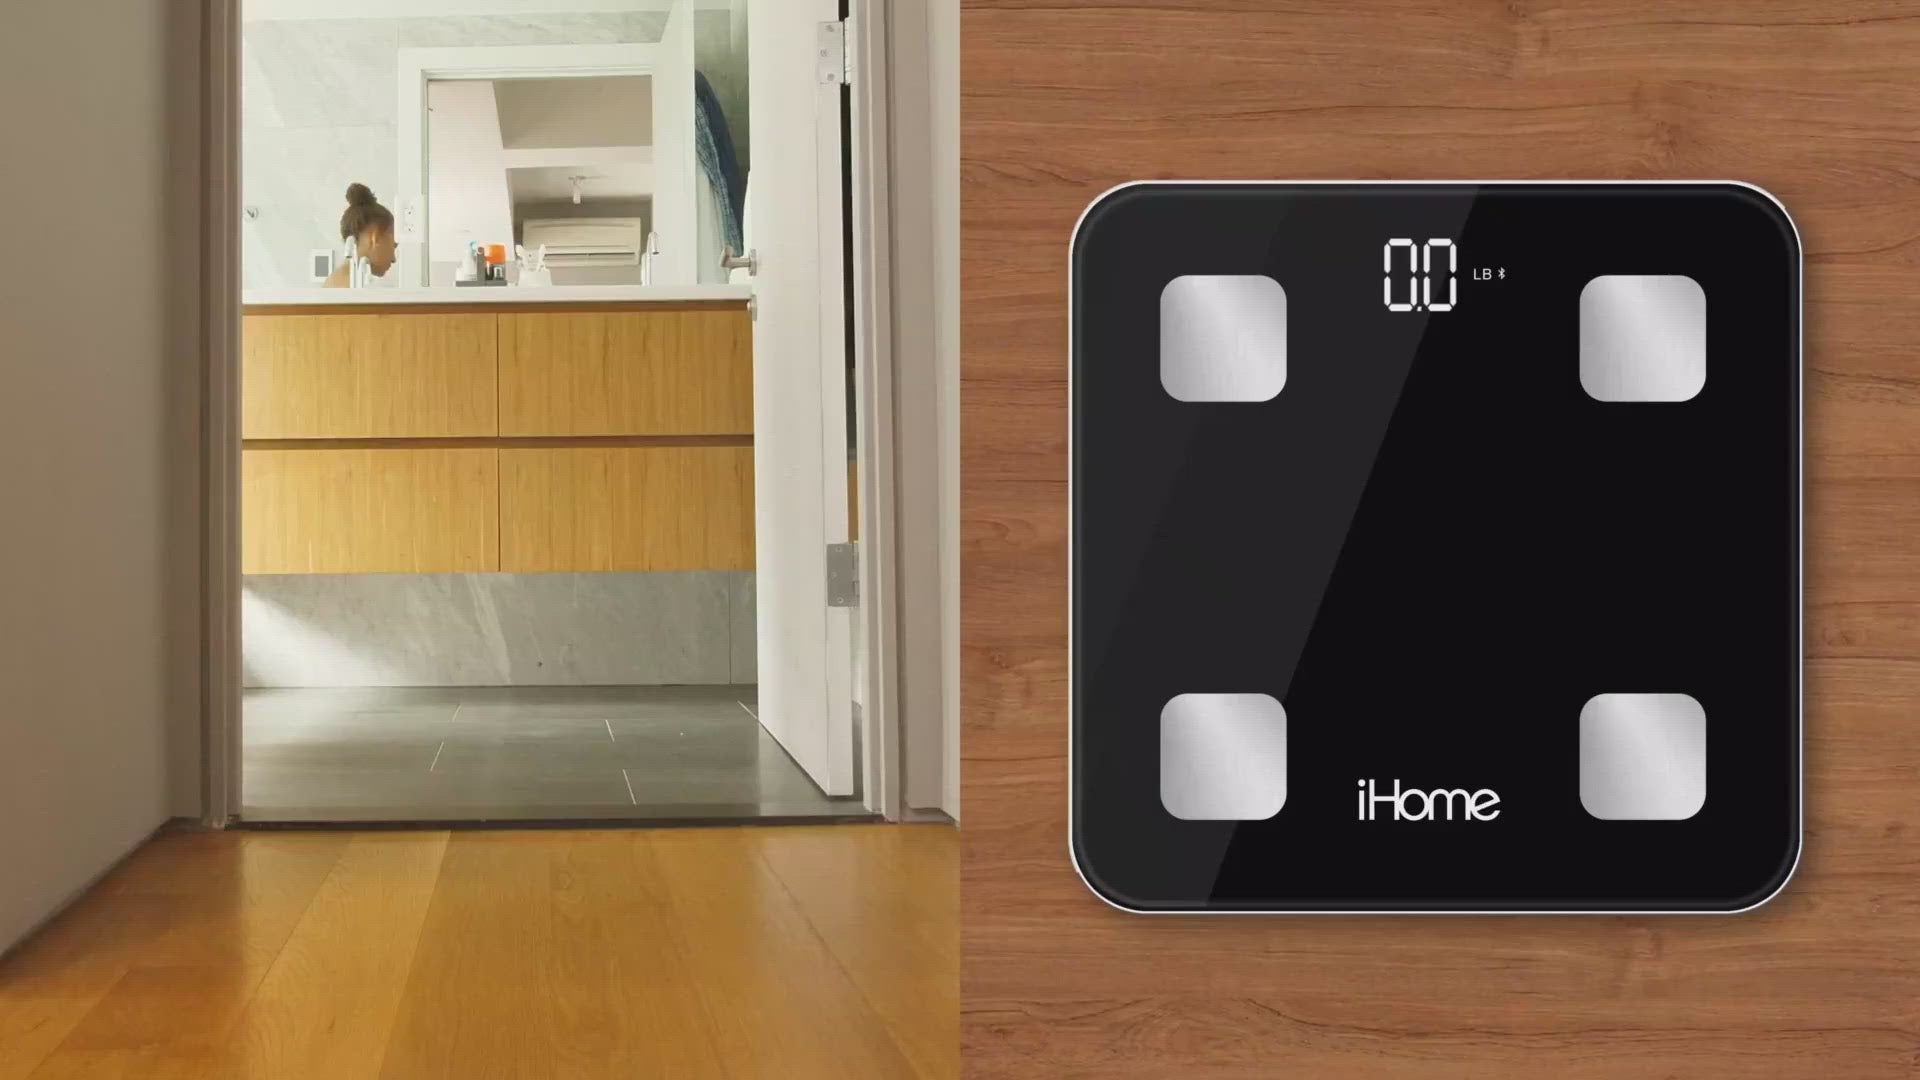 iHome Smart Scale for Body Weight (Bluetooth) Black